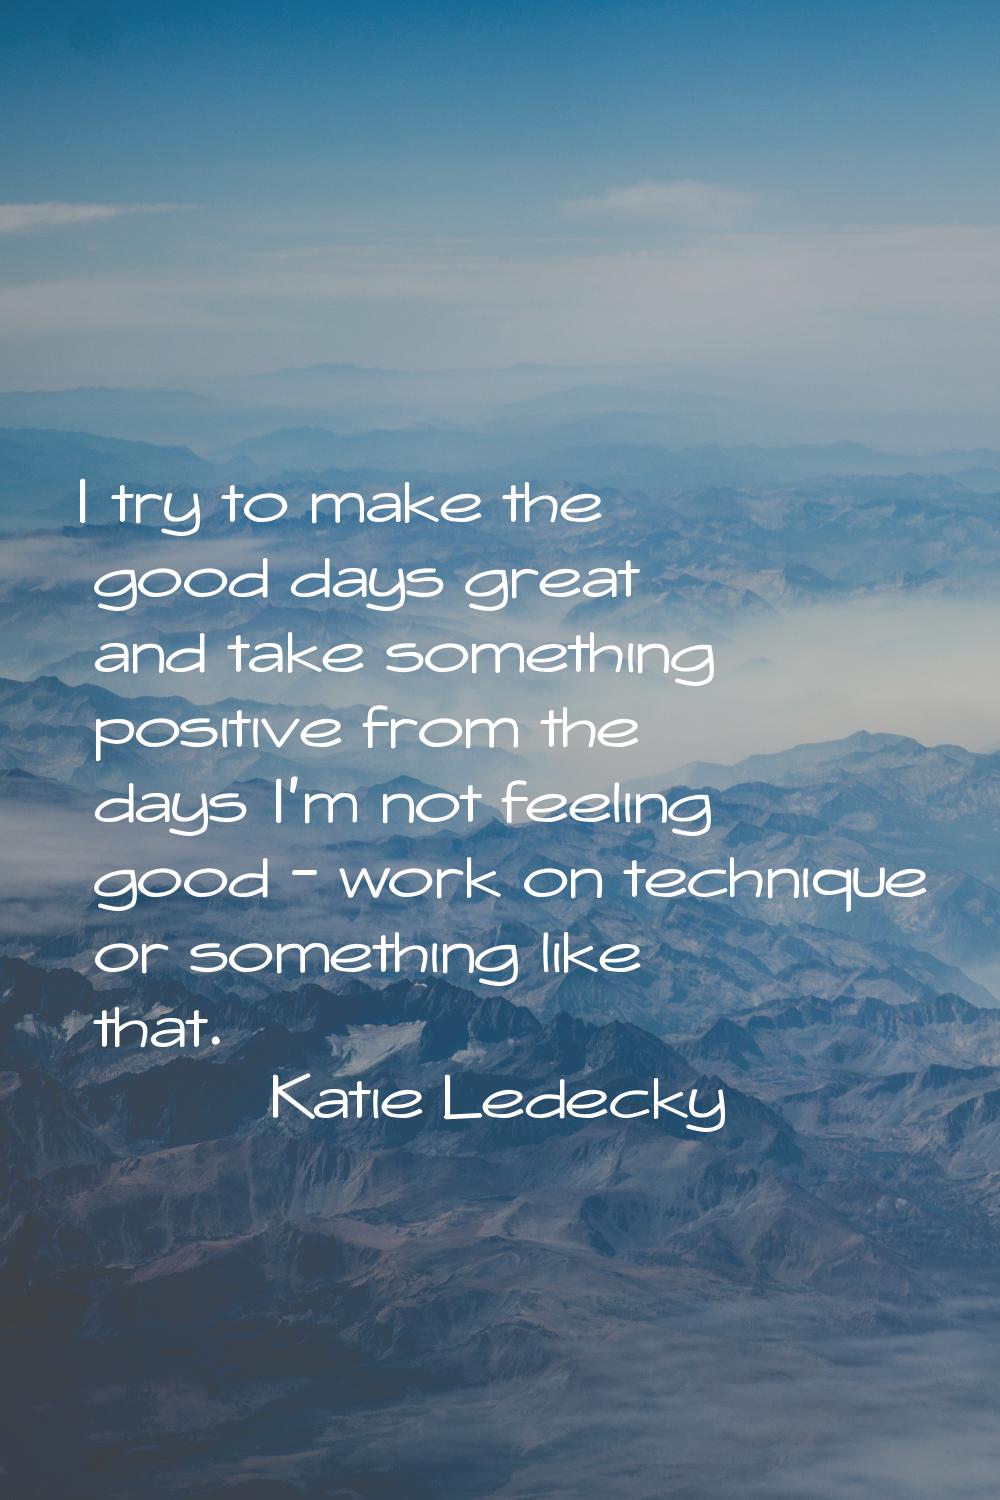 I try to make the good days great and take something positive from the days I'm not feeling good - 